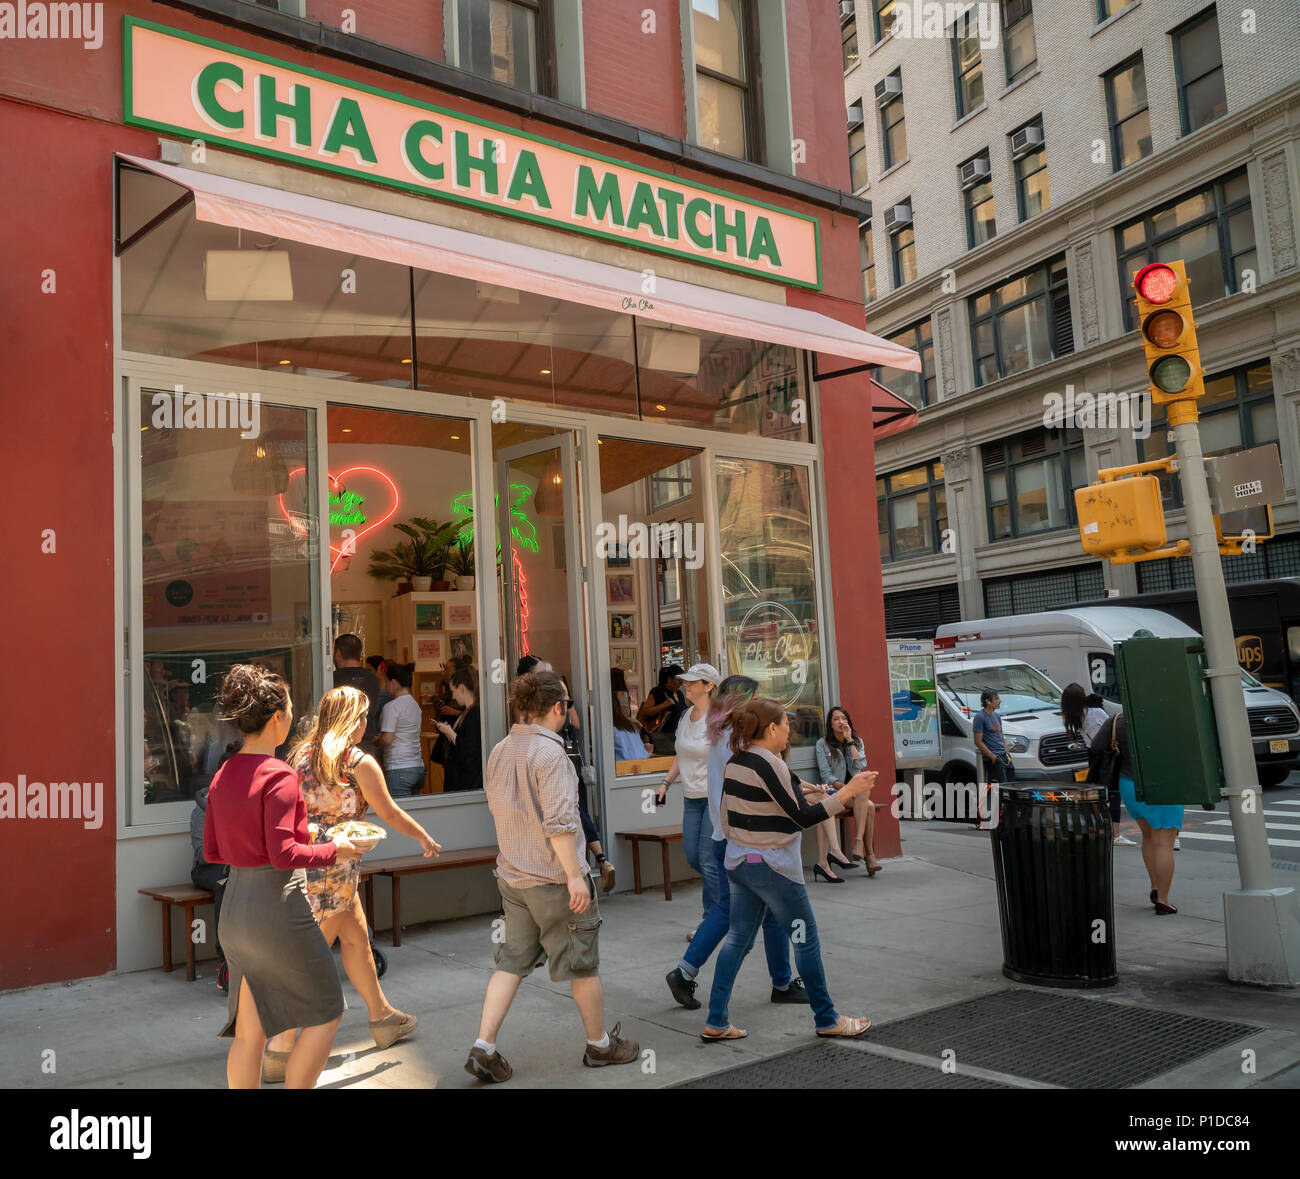 People line up for their fix of matcha at Cha Cha Matcha in the NoMad neighborhood of New York on Thursday, May 24, 2018. The popular beverage, matcha, is ground green tea and is used in Cha Cha Matcha to make instagrammable beverages popular with millennials. Loaded with antioxidants matcha supposedly has medicinal qualities. (© Richard B. Levine) Stock Photo